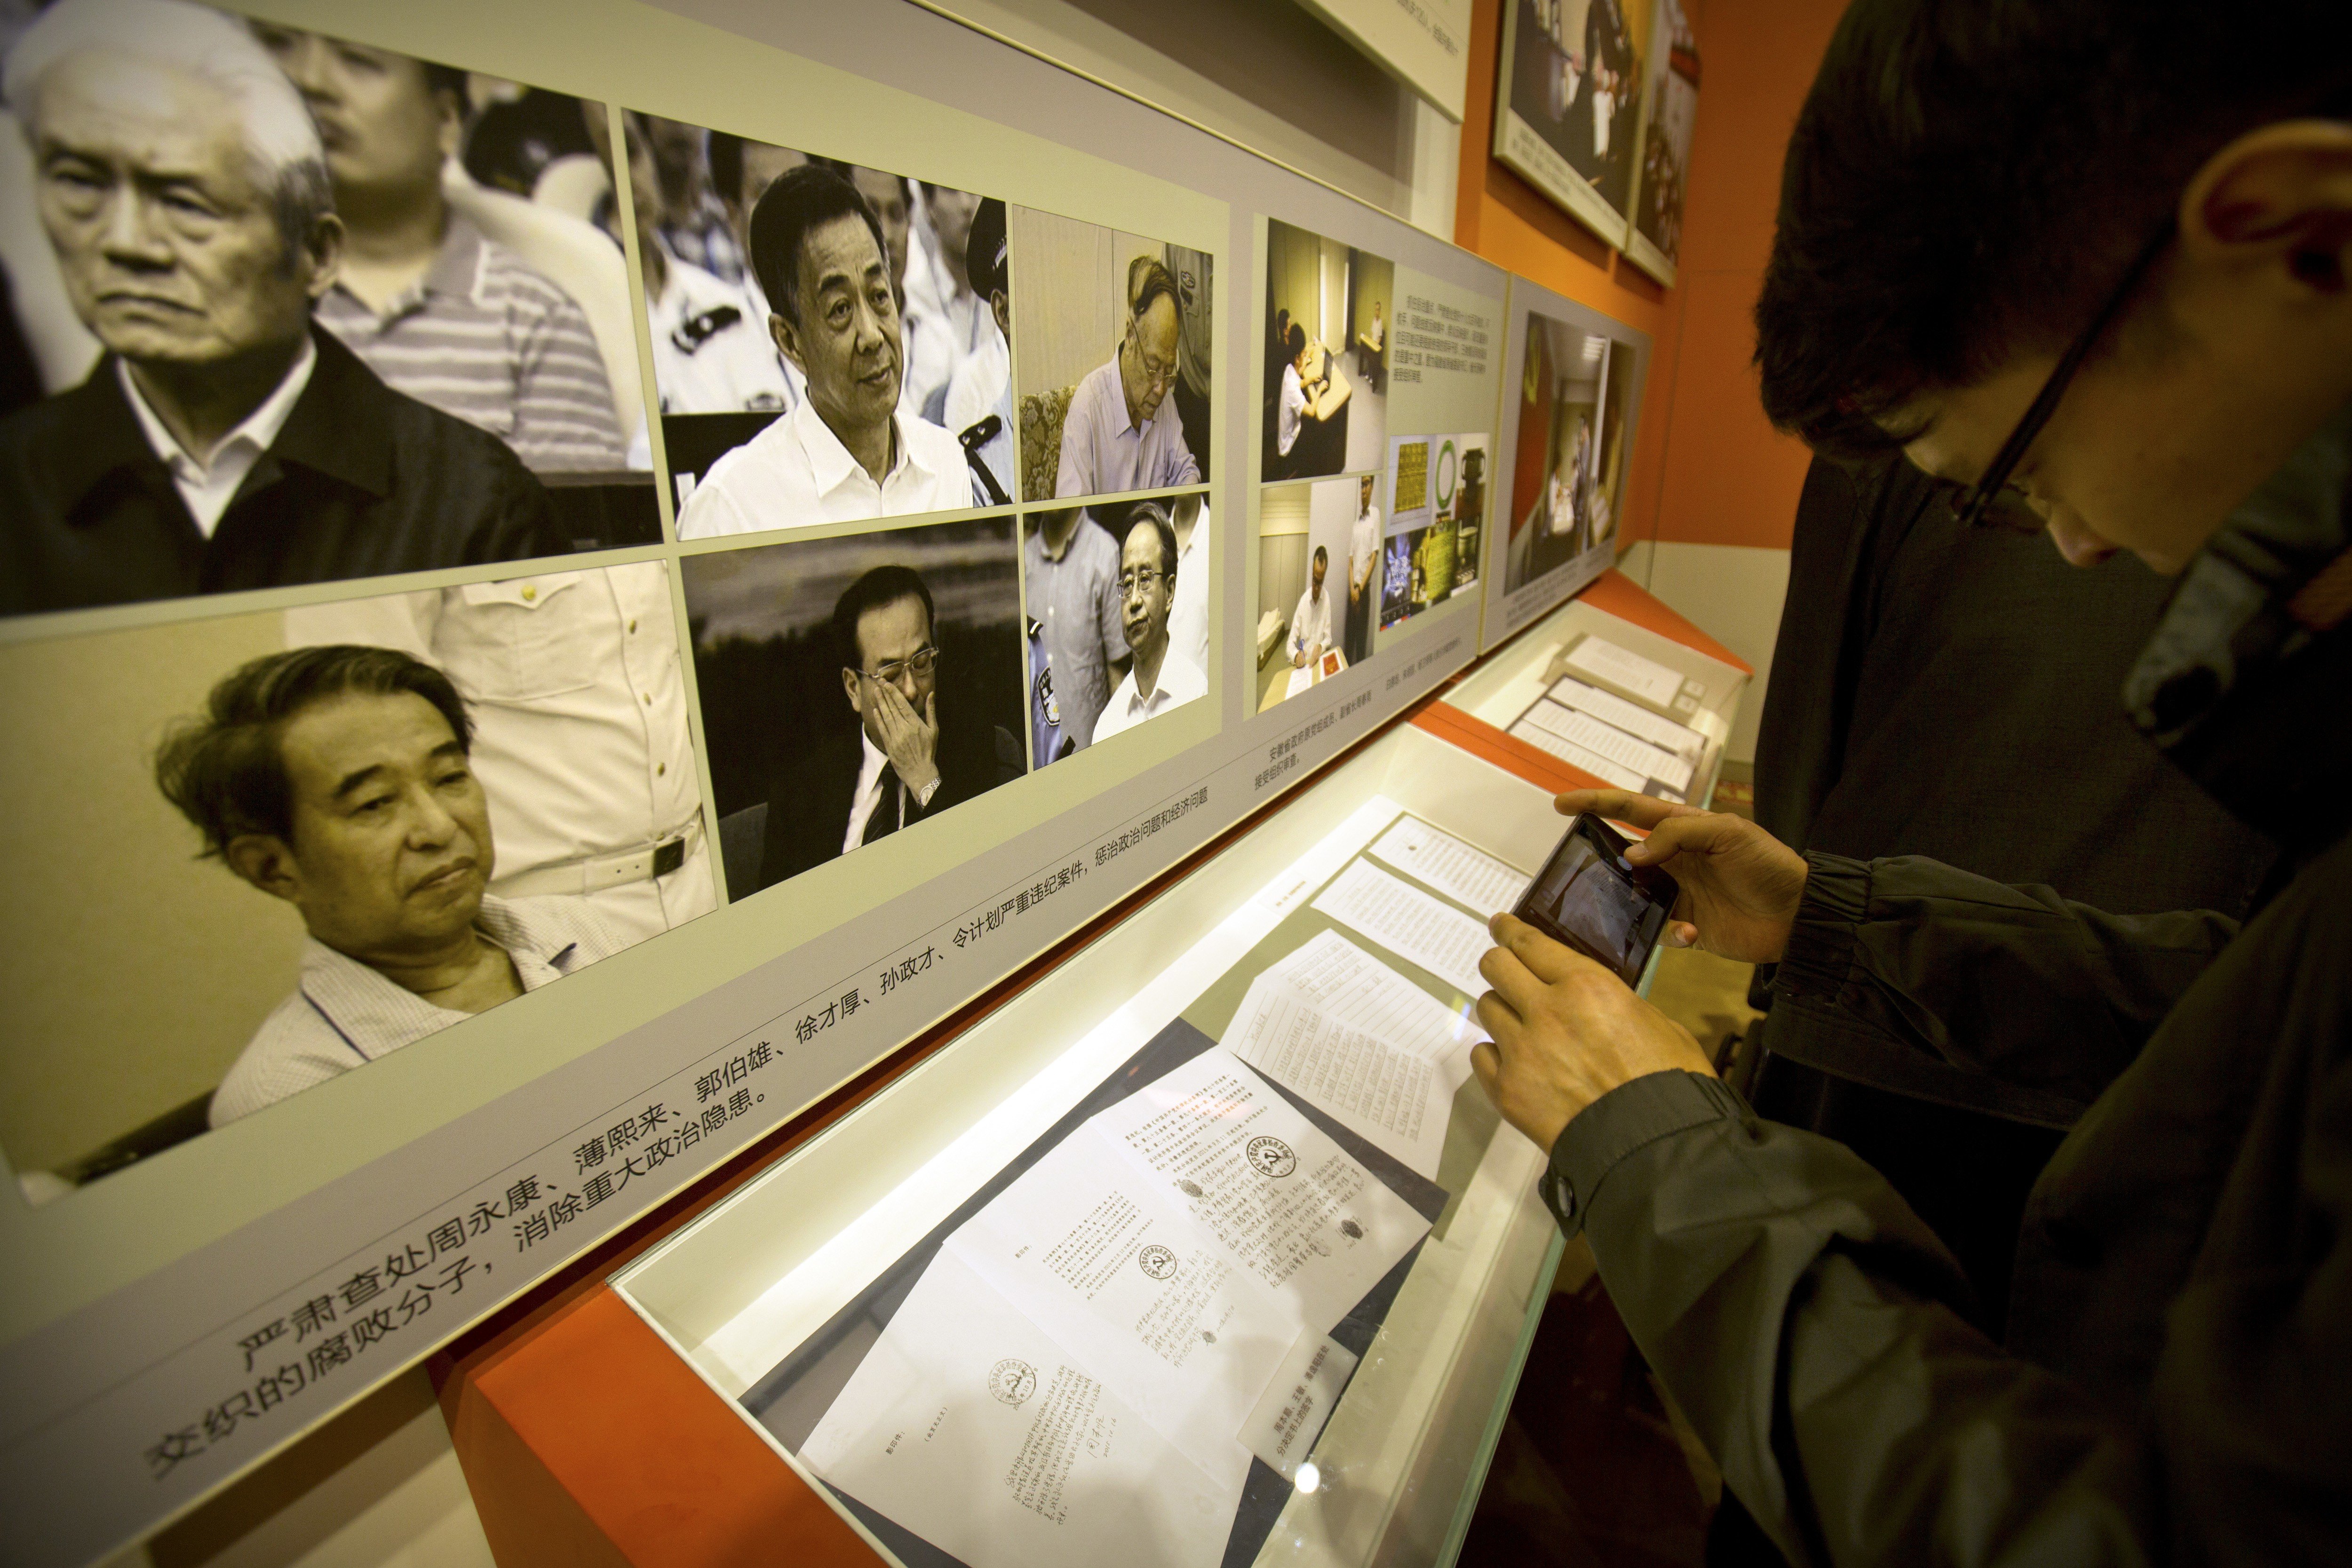 A visitor looks at photos of and statements of repentance by corrupt Chinese officials, (clockwise from upper left) Zhou Yongkang, Bo Xilai, Guo Boxiong, Ling Jihua, Sun Zhengcai and Xu Caihou, at an exhibition in Beijing on September 28, 2017. Photo: AP